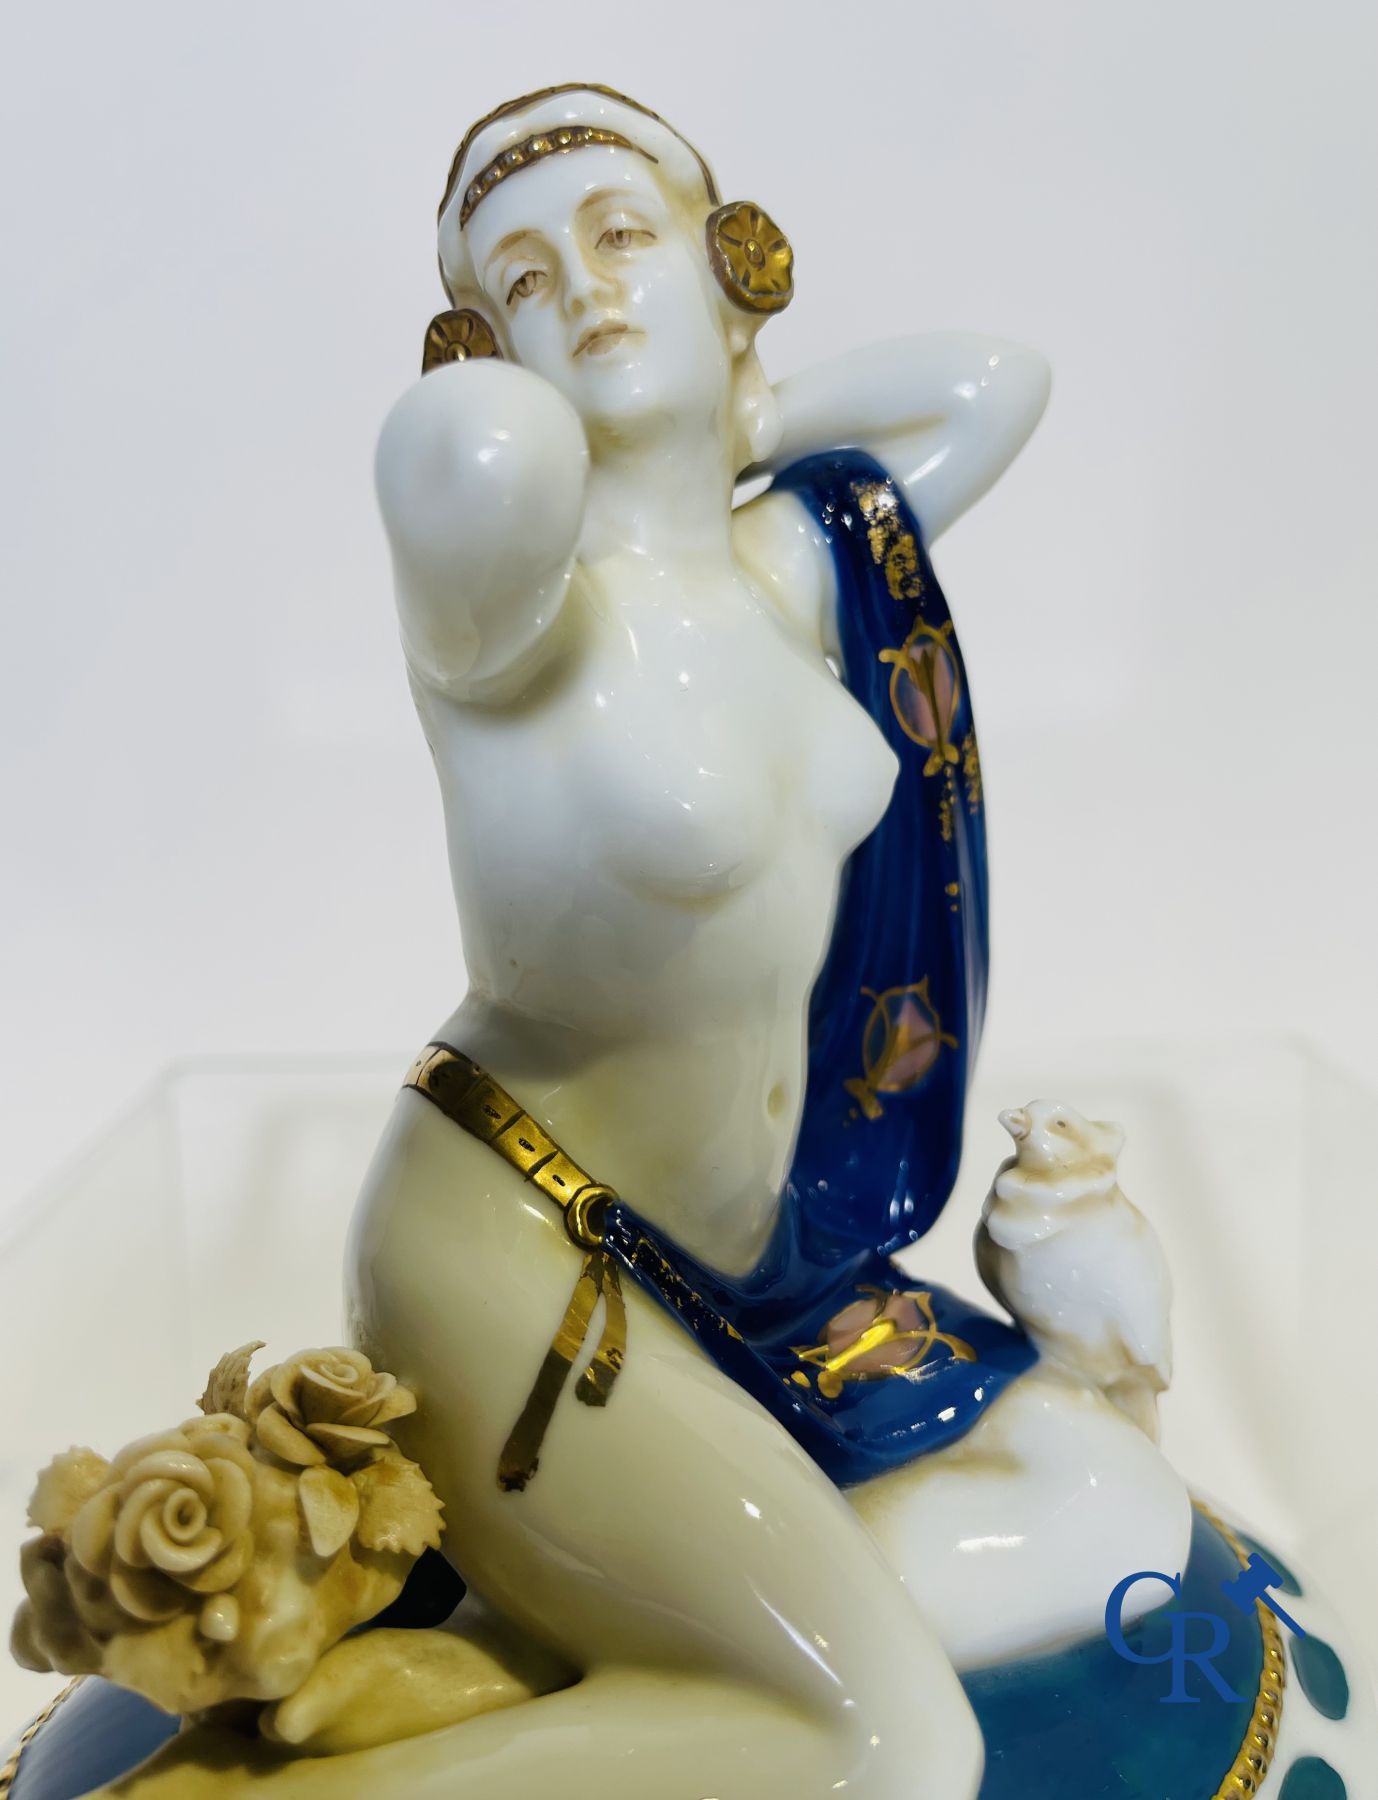 Art deco: An art deco sculpture in finely marked porcelain. - Image 6 of 9